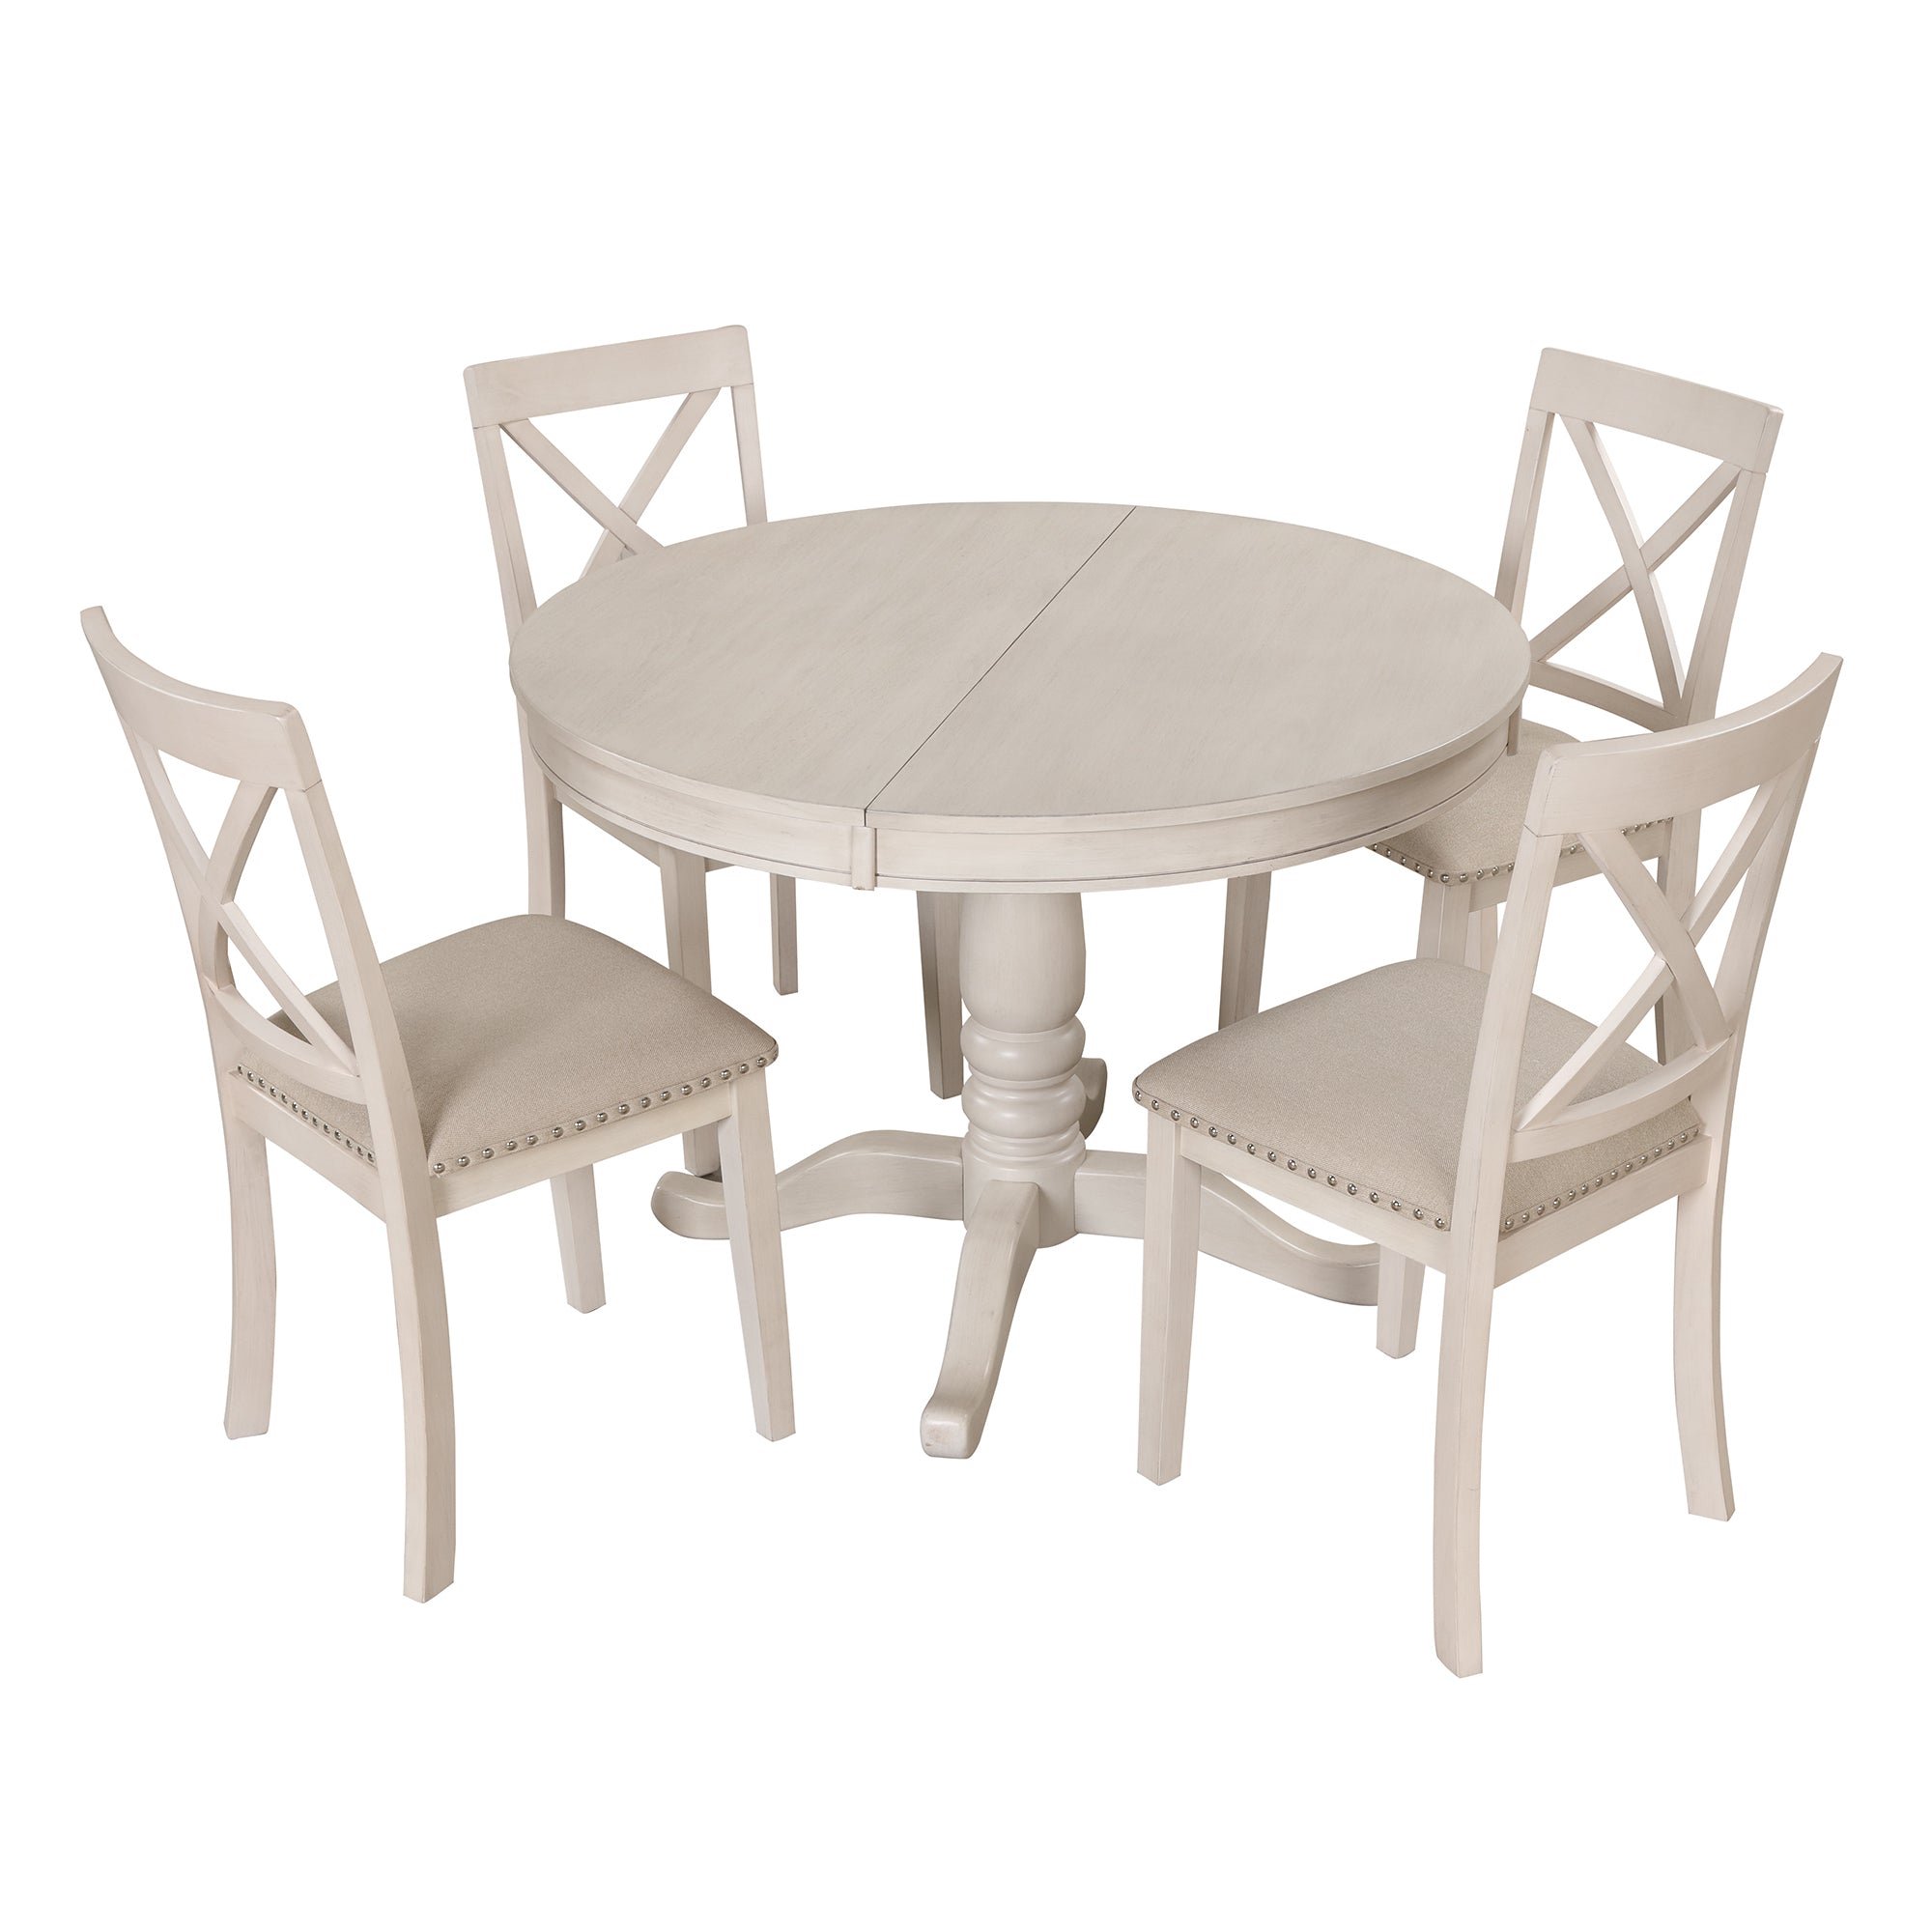 Modern Dining Table Set for 4